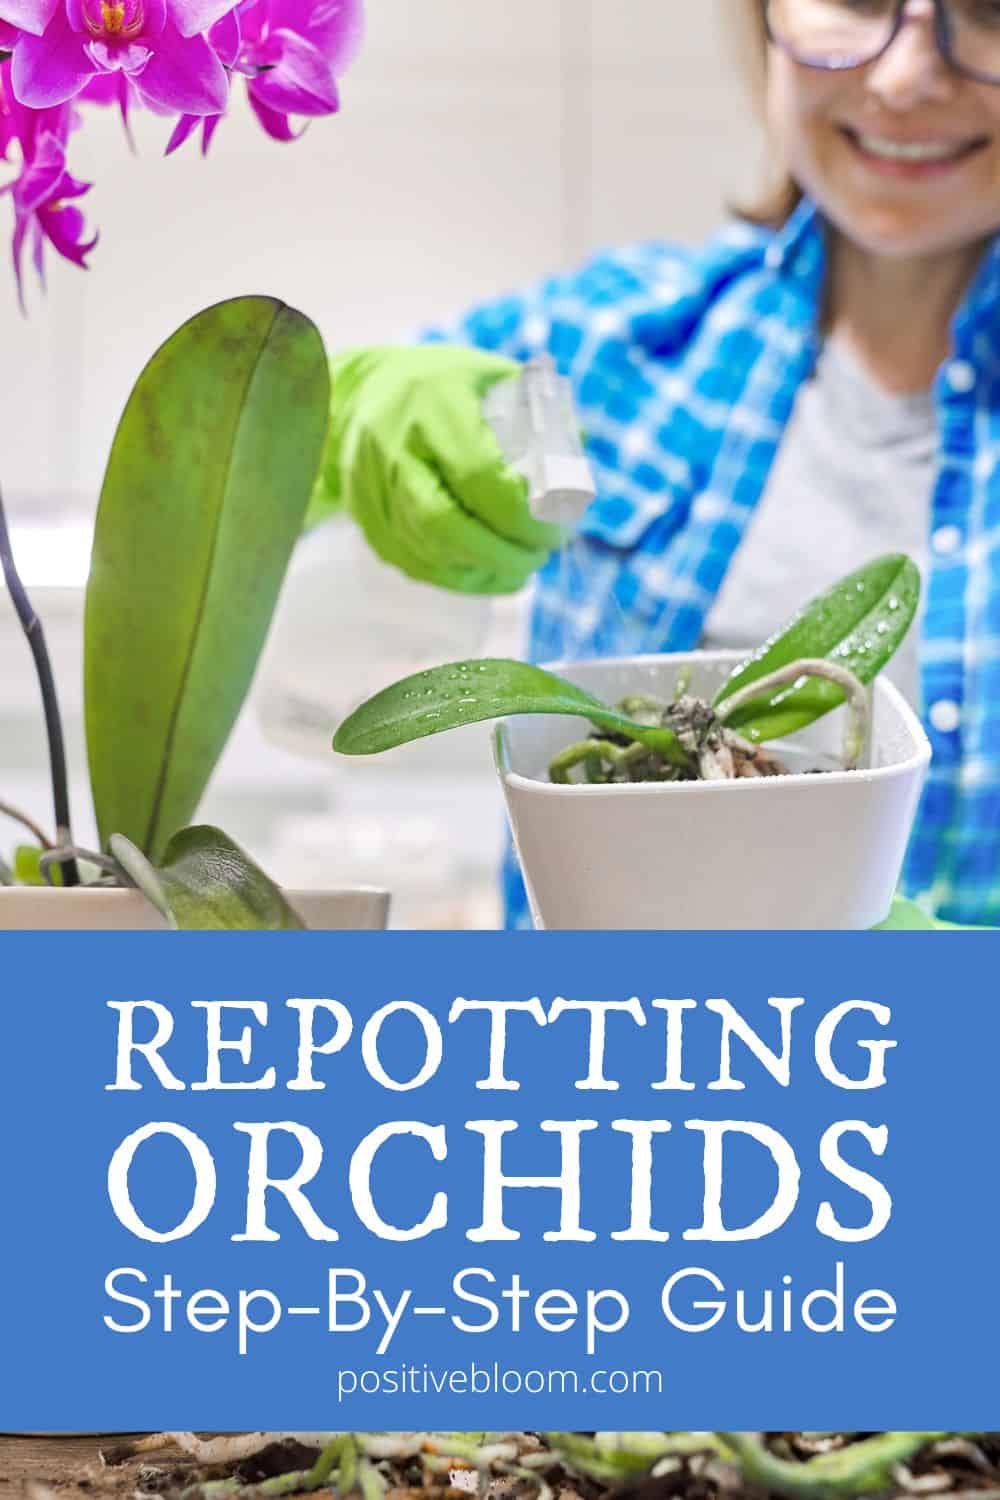 Step-By-Step Guide To Repotting Orchids (Best Tips)